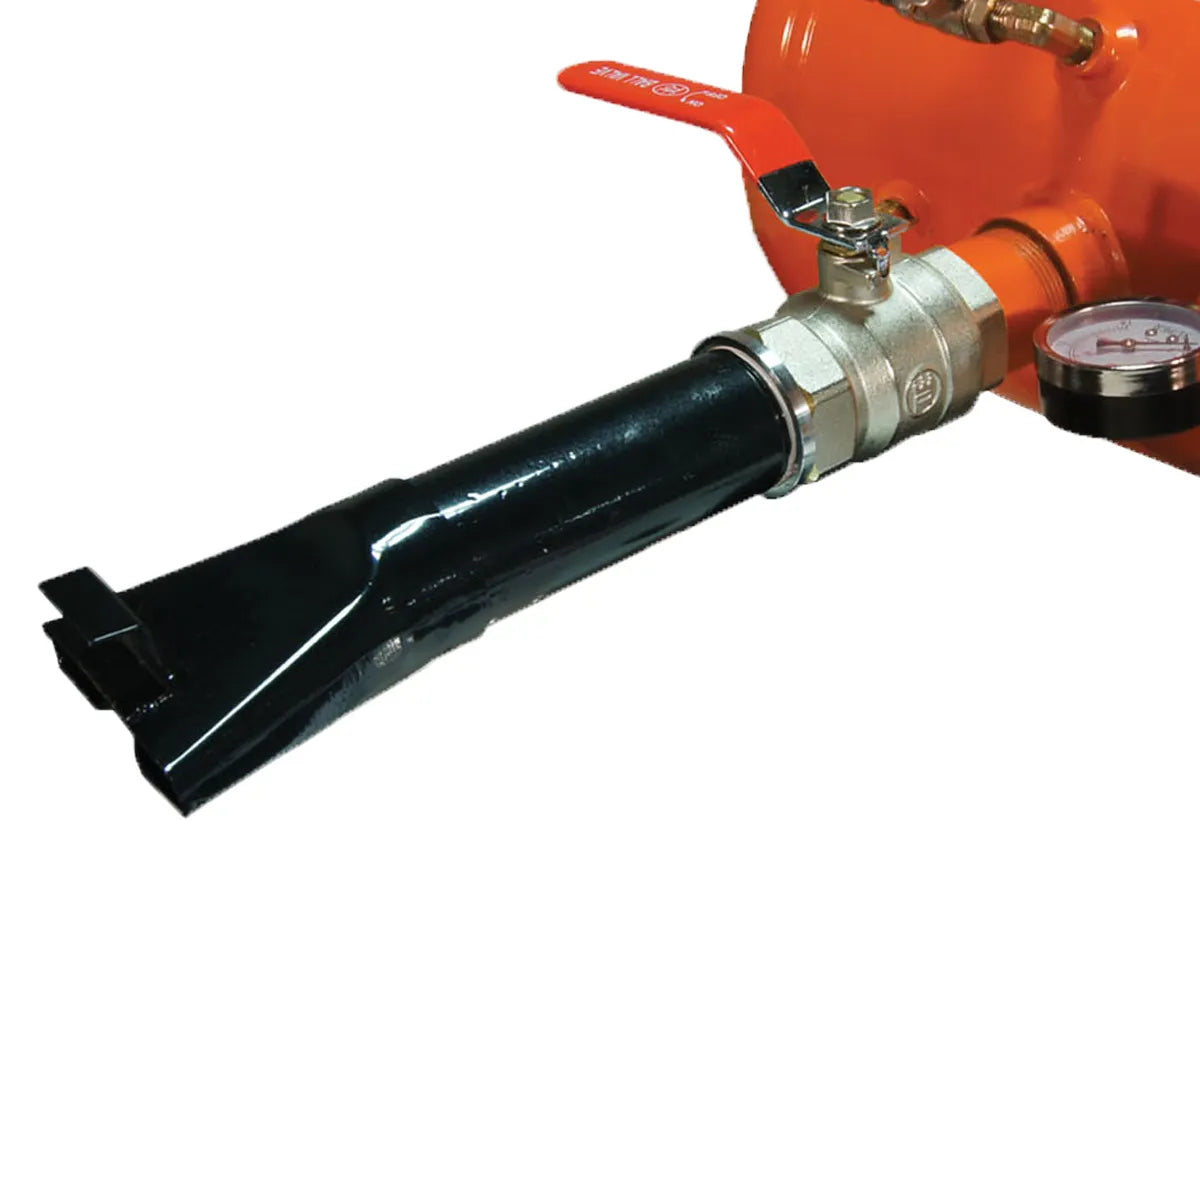 Martins Industries MBS-5 5-Gallon Bead Seater - MPR Tools & Equipment